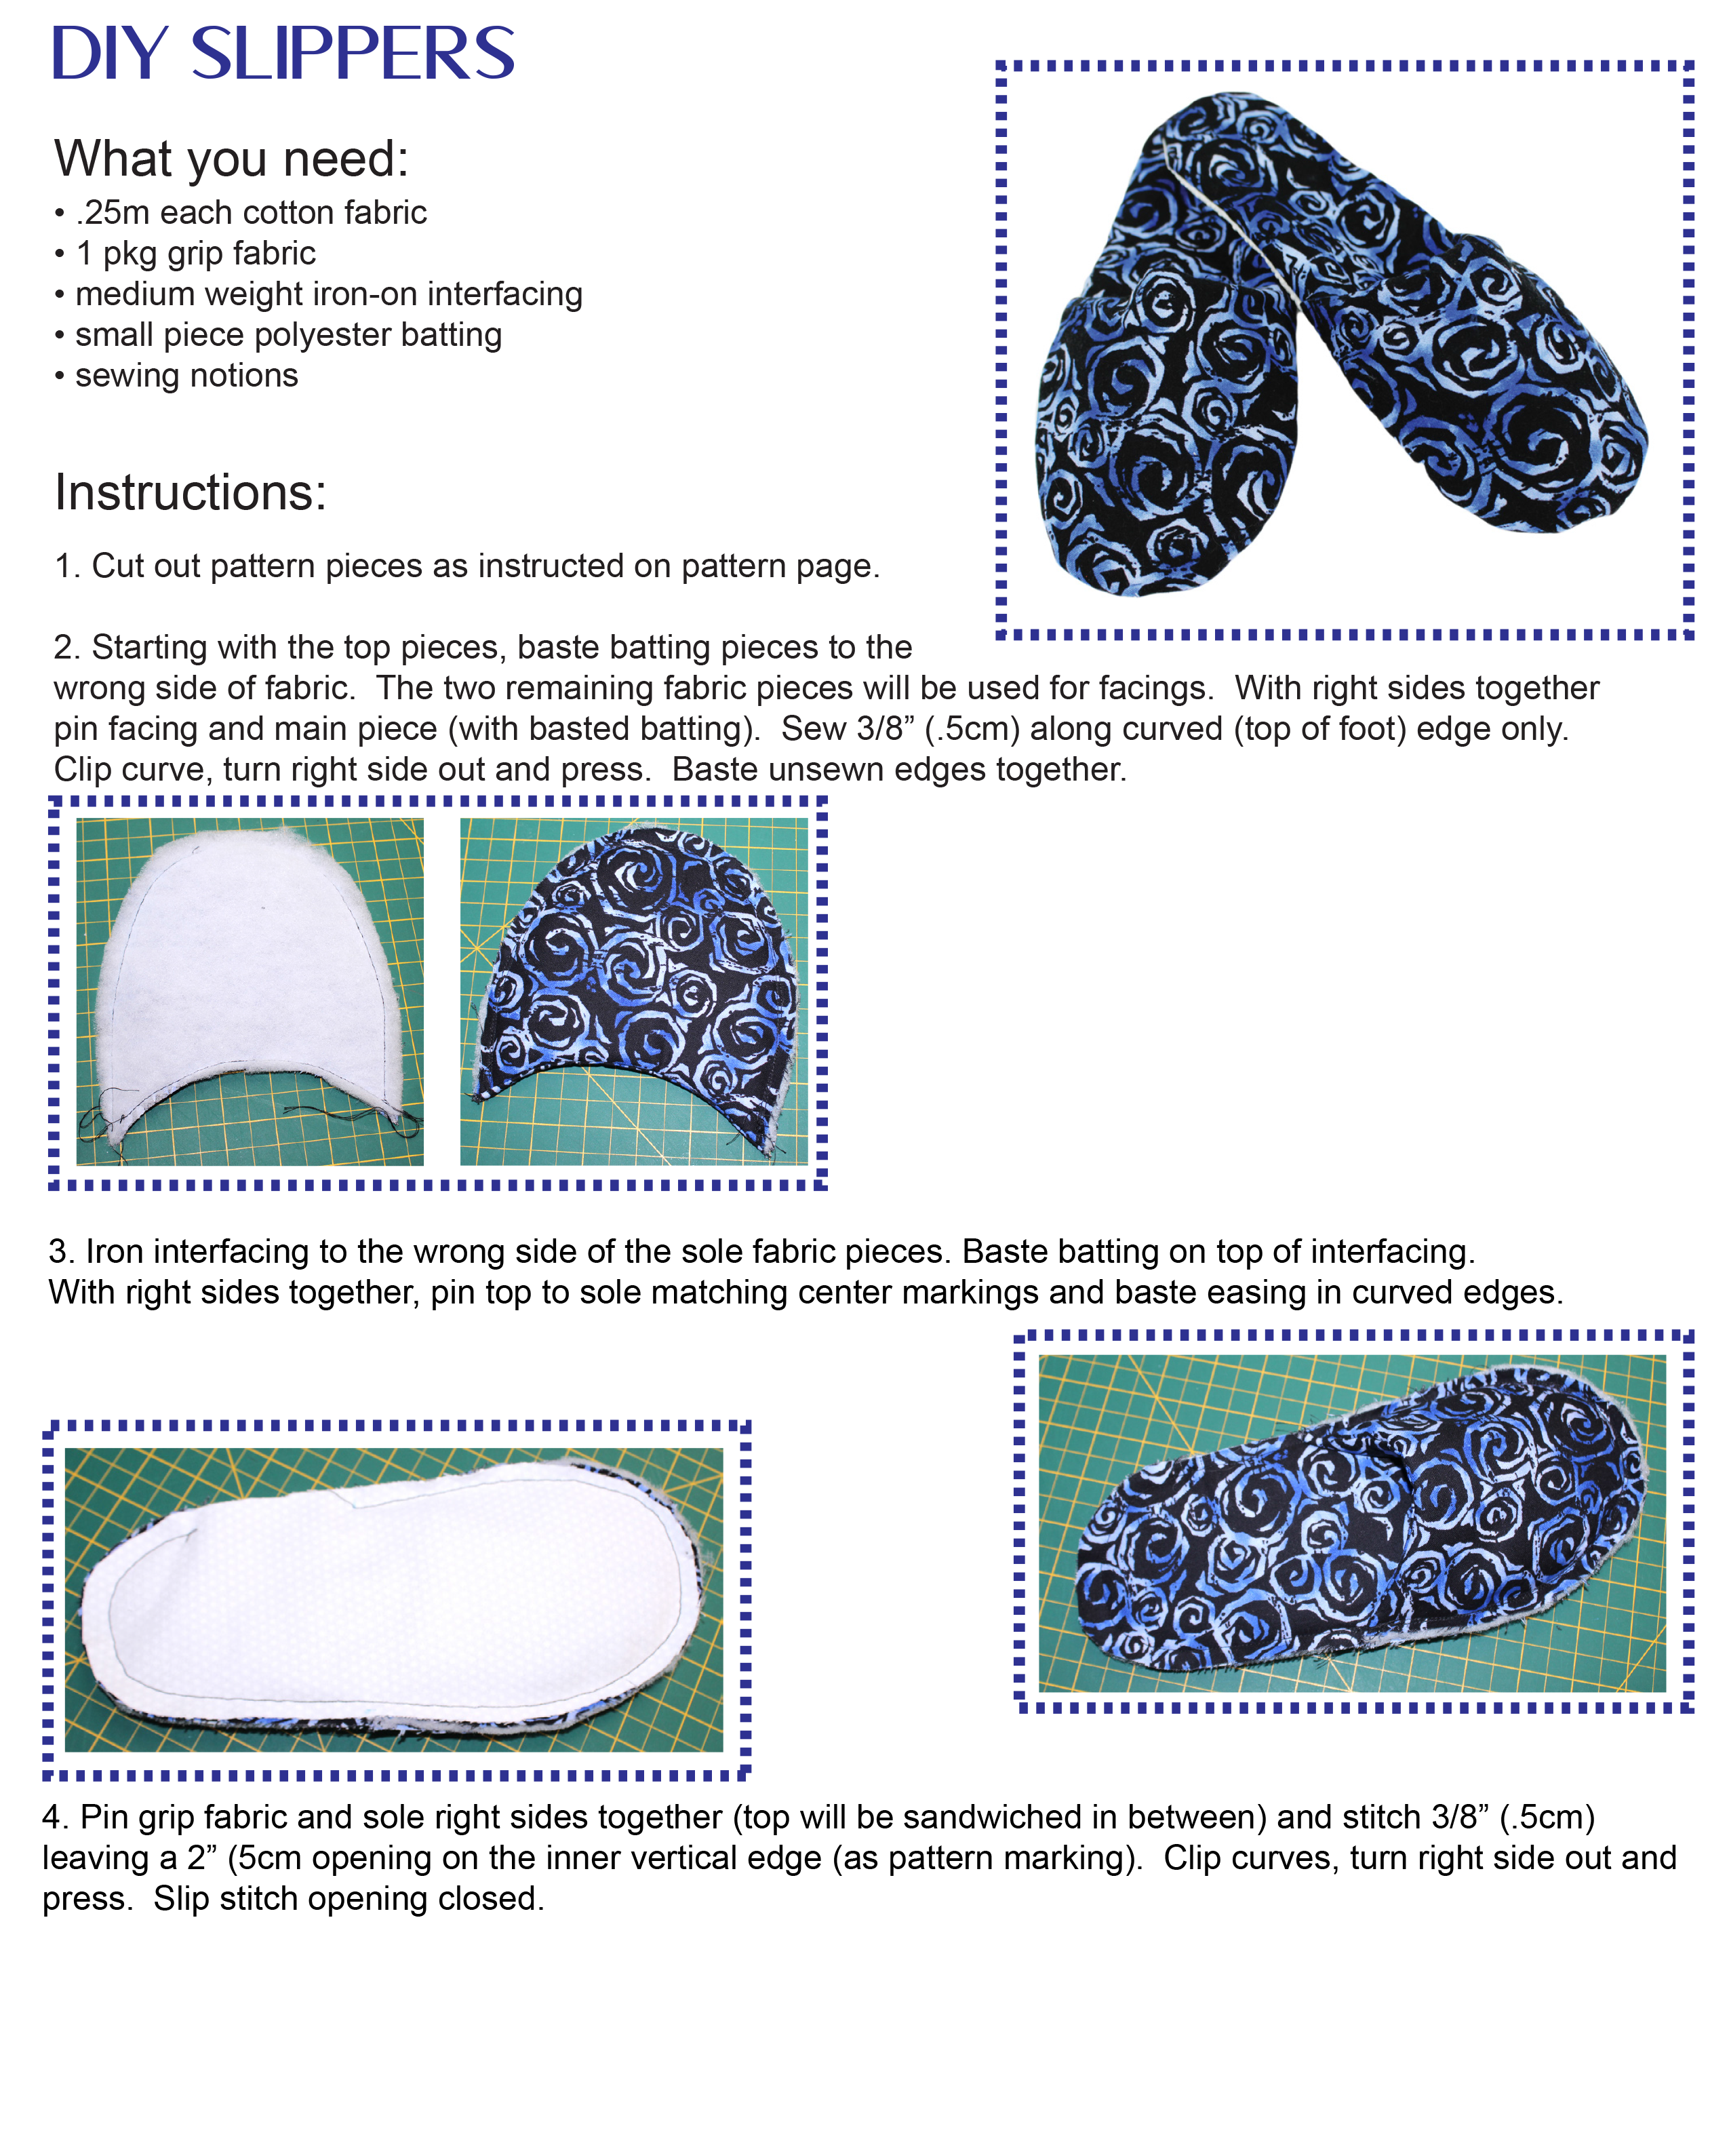 4 steps to create your own slippers